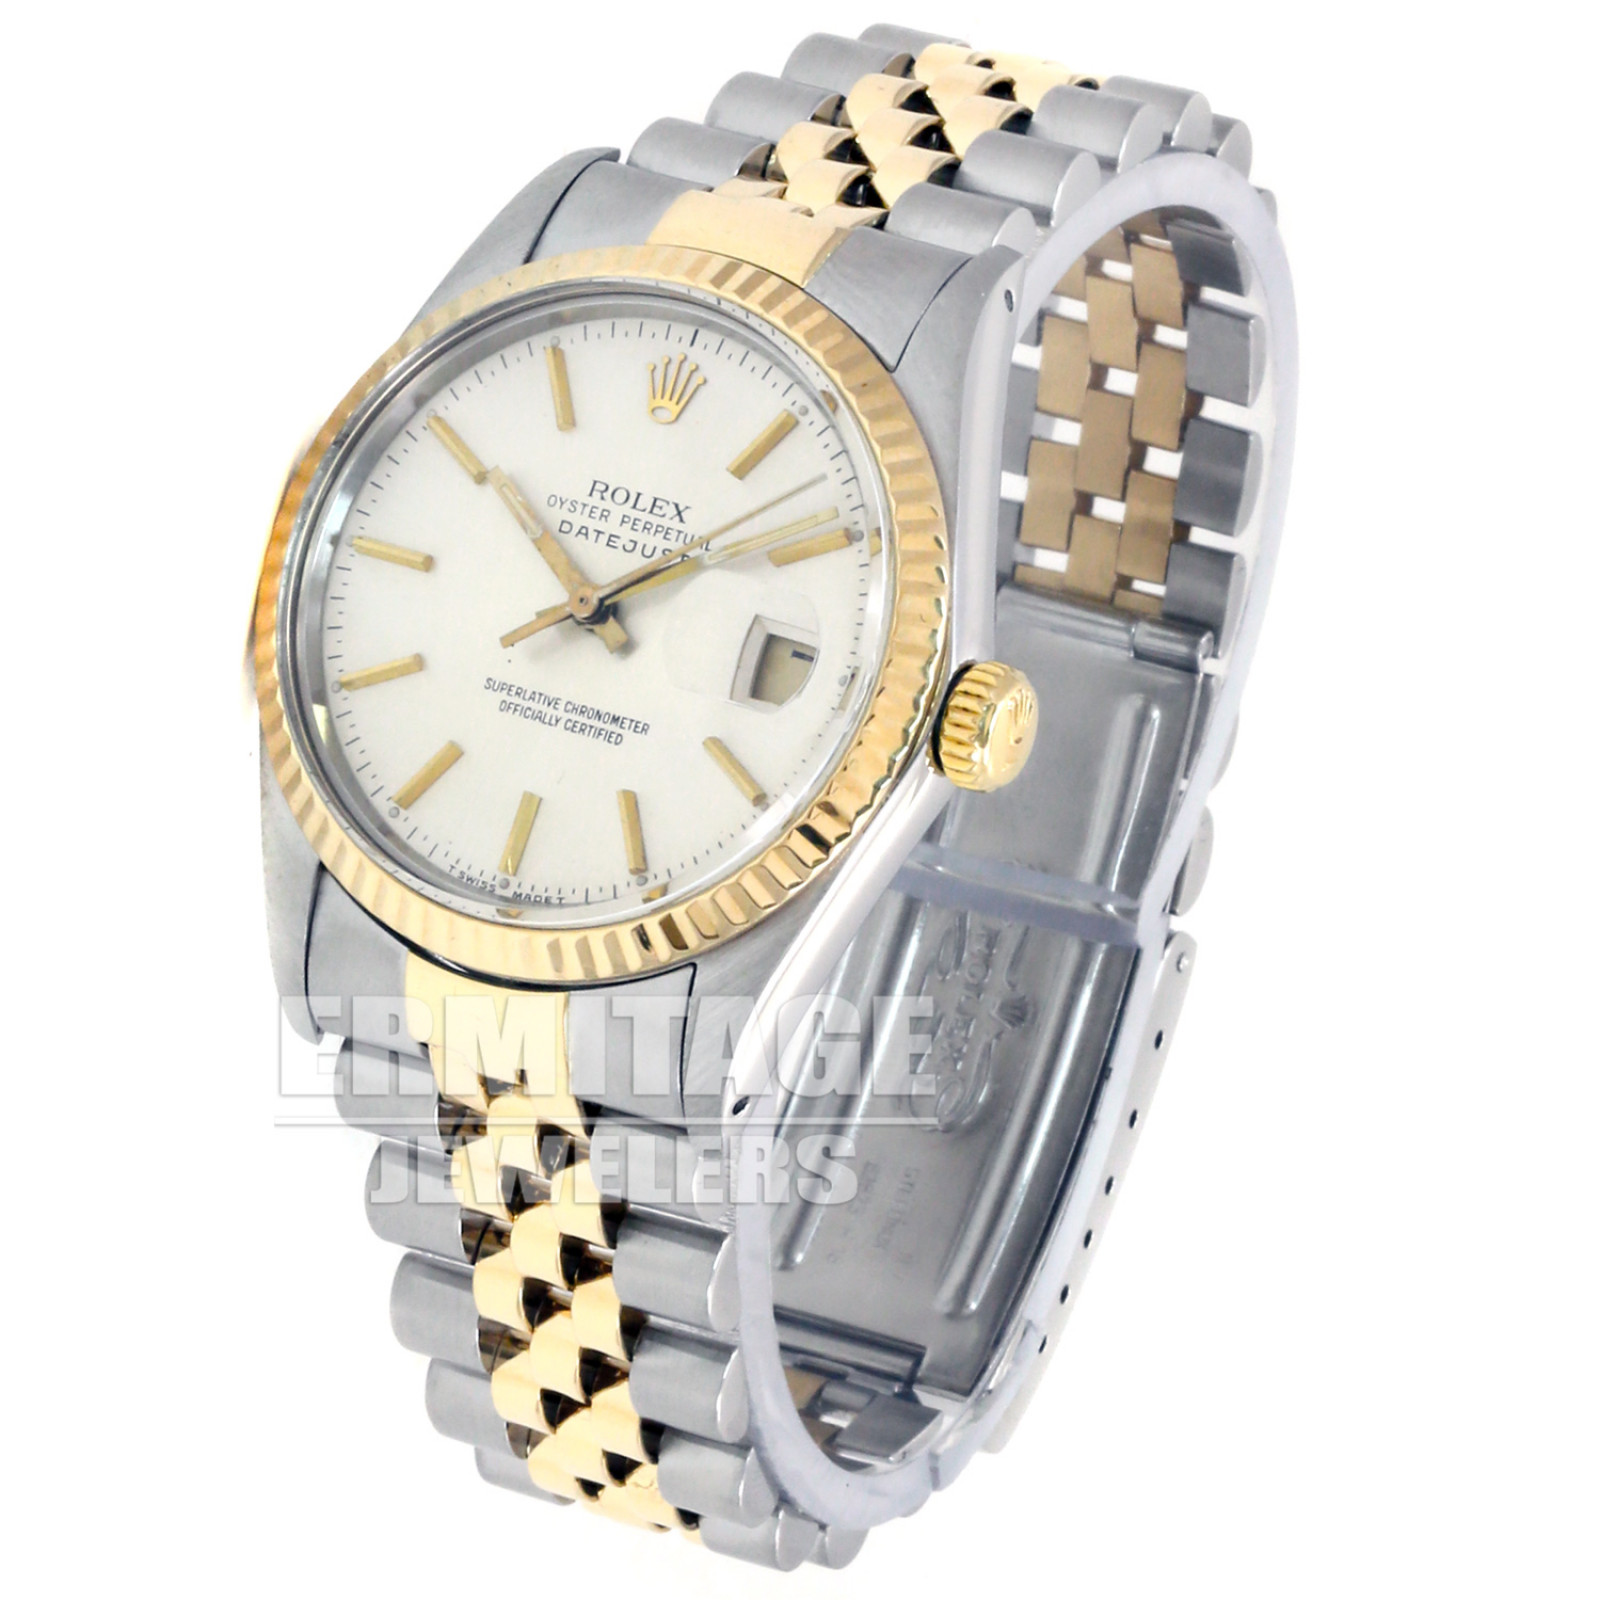 Sell Rolex Datejust 16013 with Steel Dial